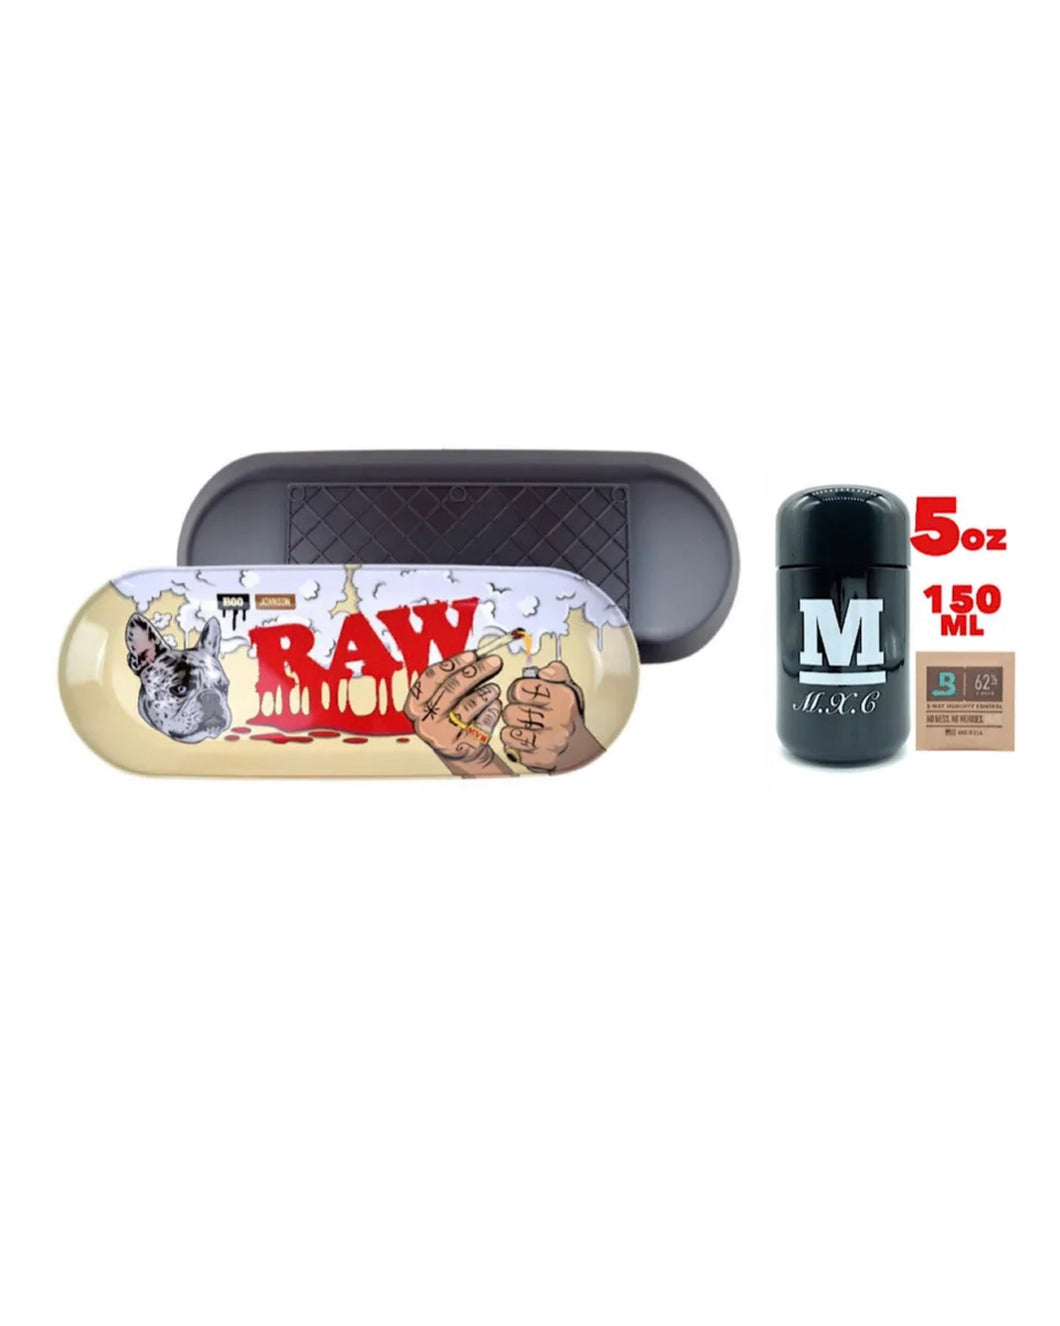 RAW X BOO JOHNSON SKATE DECK ROLLING TRAY 16.7”+M glass jar smell proof+boveda